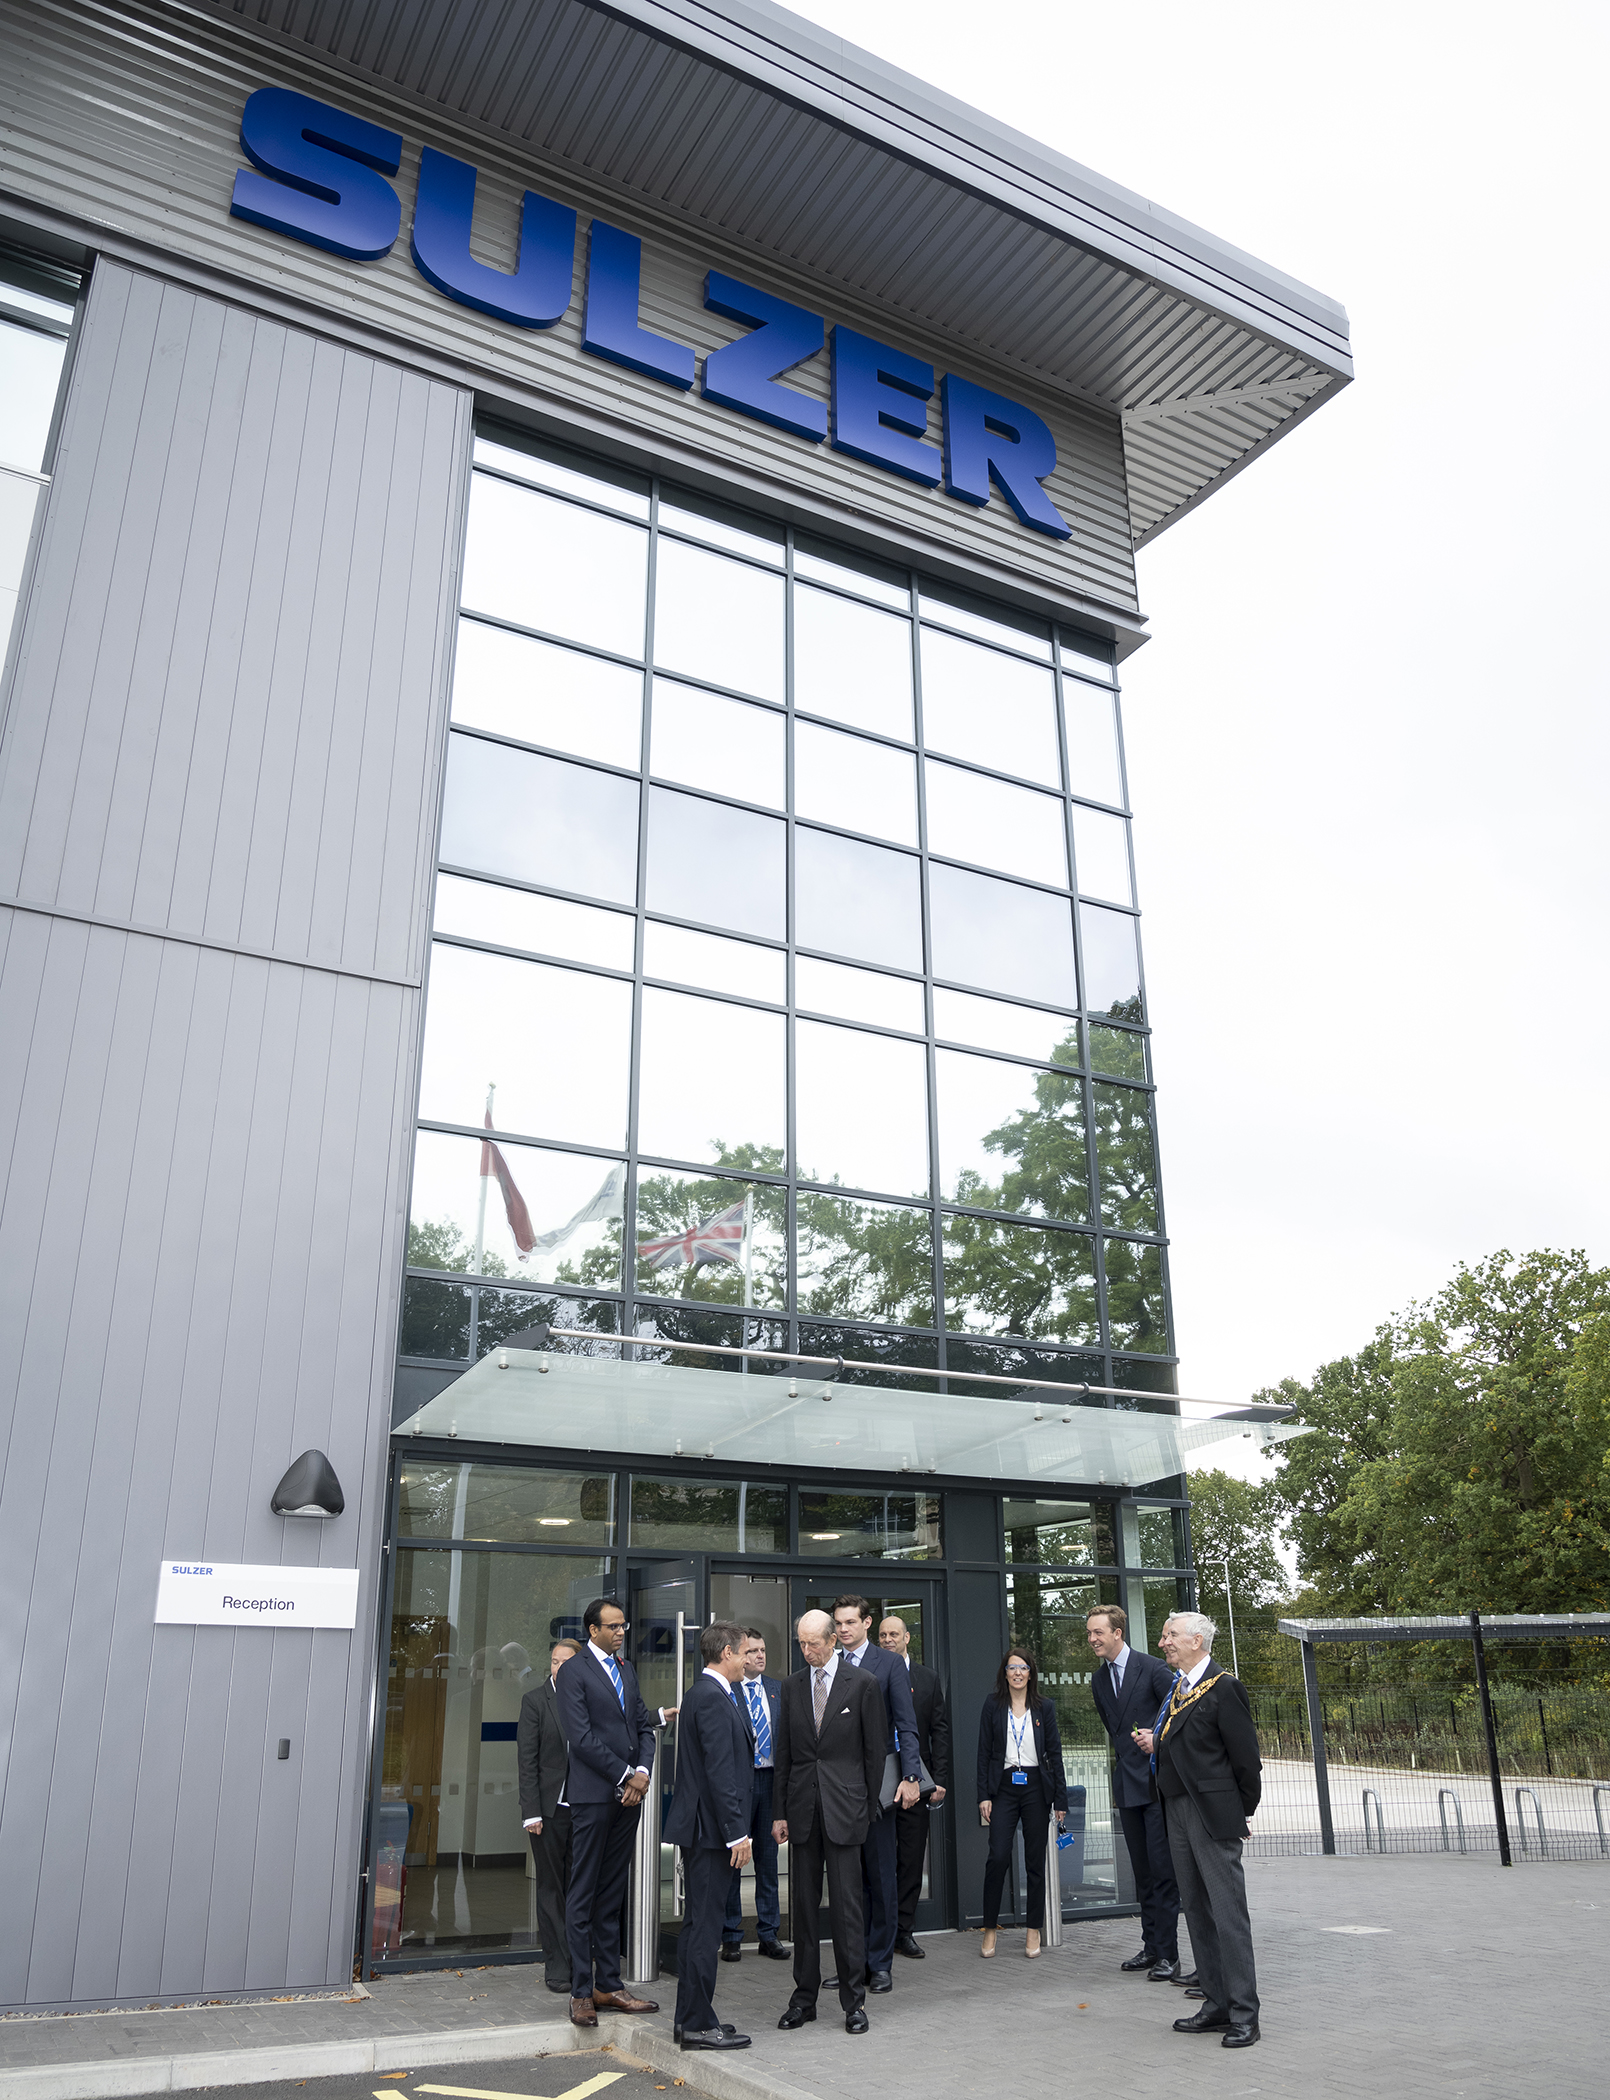 Sulzer’s state-of-the-art Birmingham Service Center was officially opened by His Royal Highness The Duke of Kent.